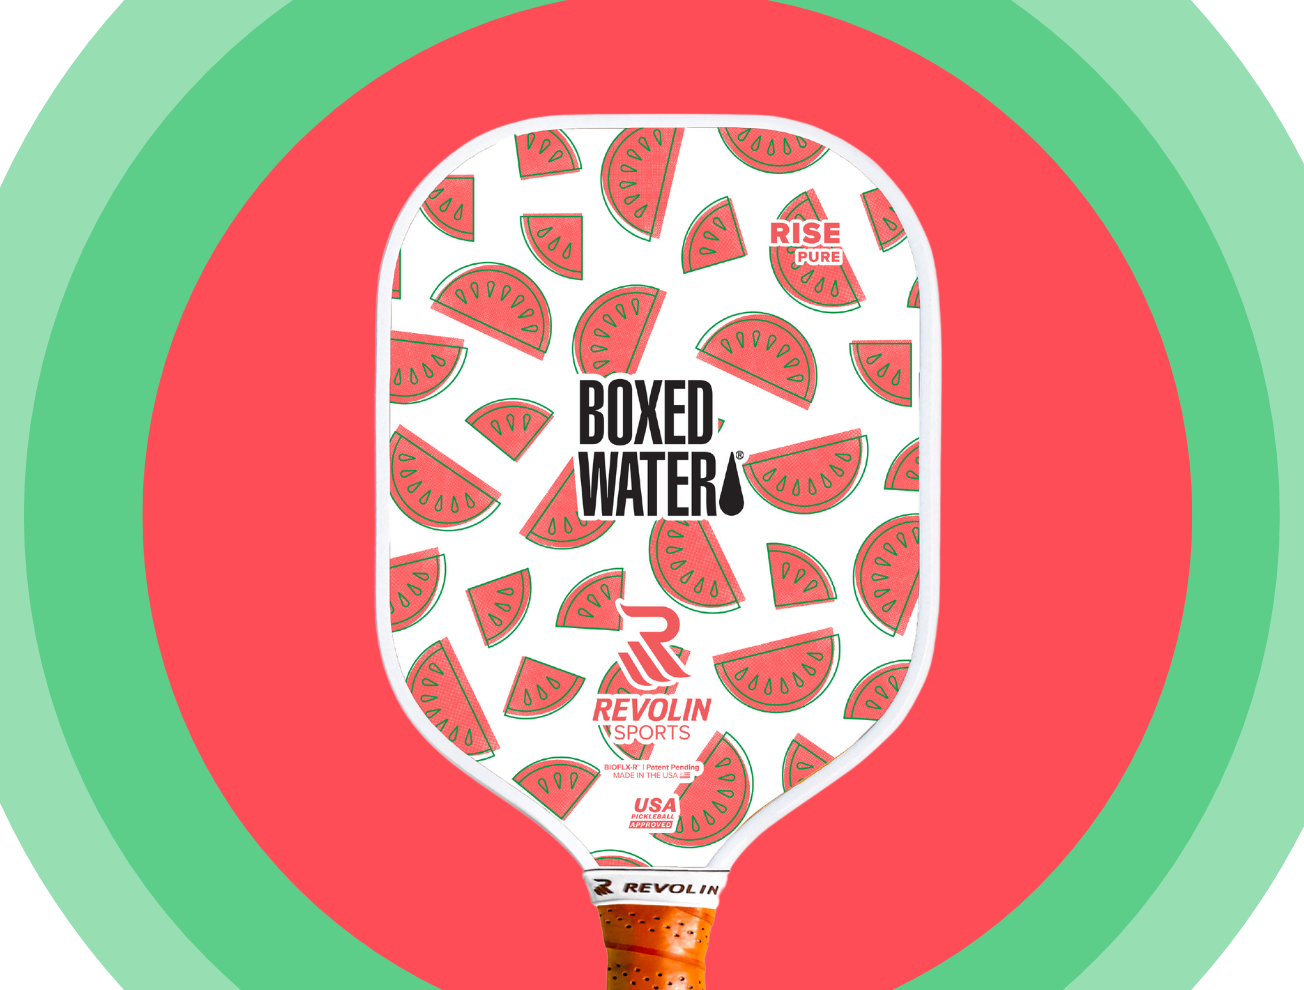 Boxed Water™ Watermelon Flavor Splashes into Pickleball with Custom Pickleball Paddles